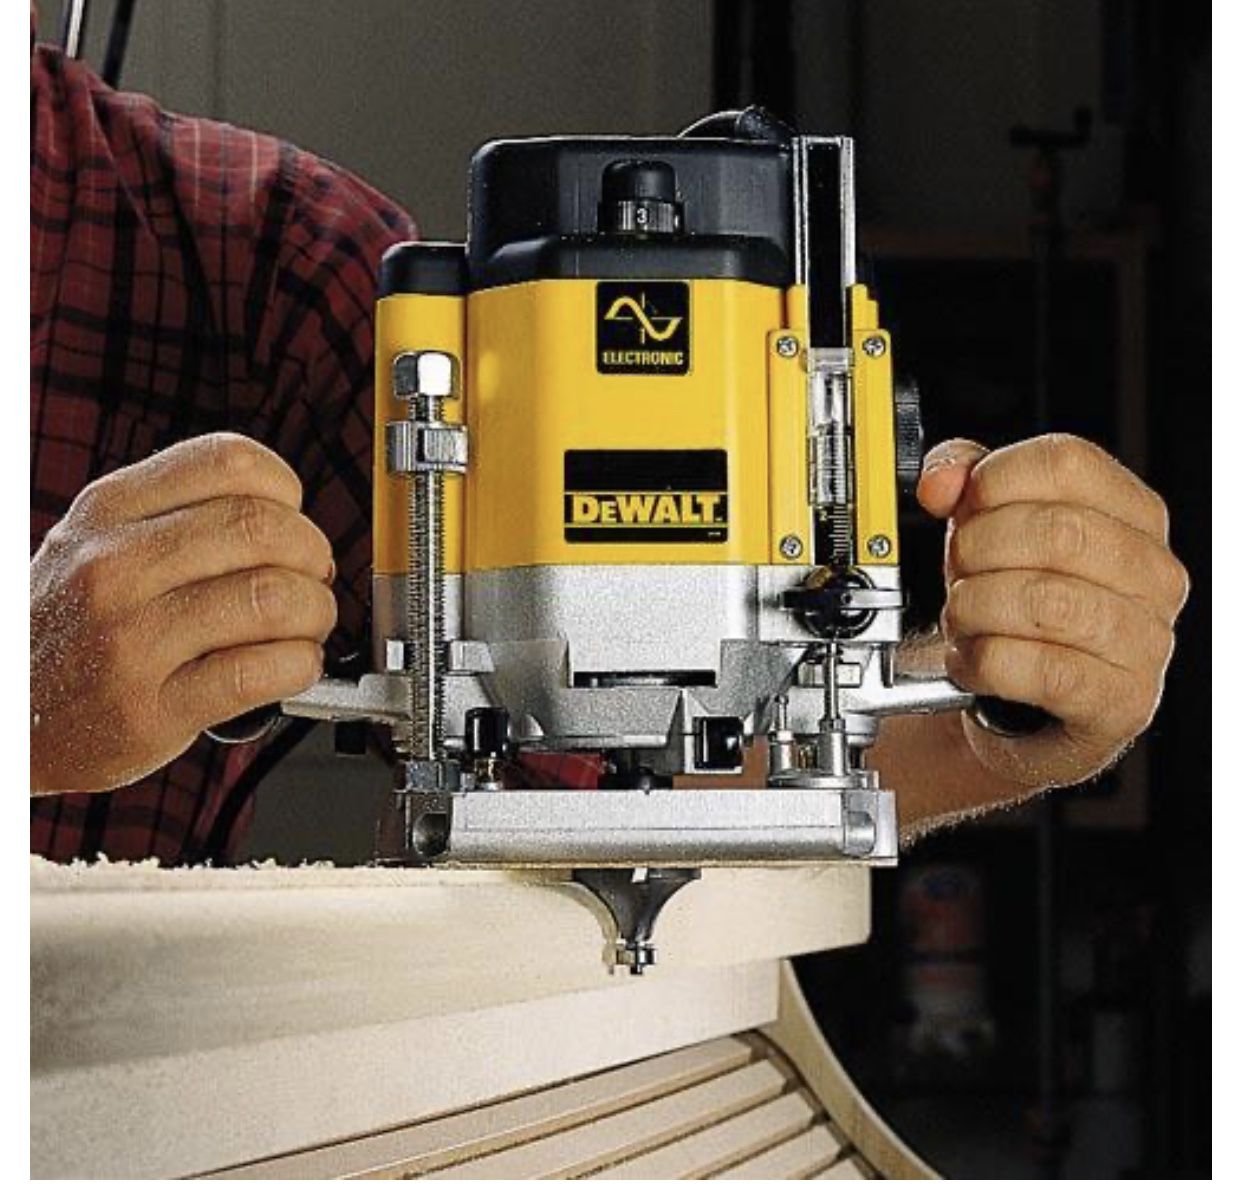 DeWALT DW625 3HP Variable Speed Plunge Router Woodworking Tool